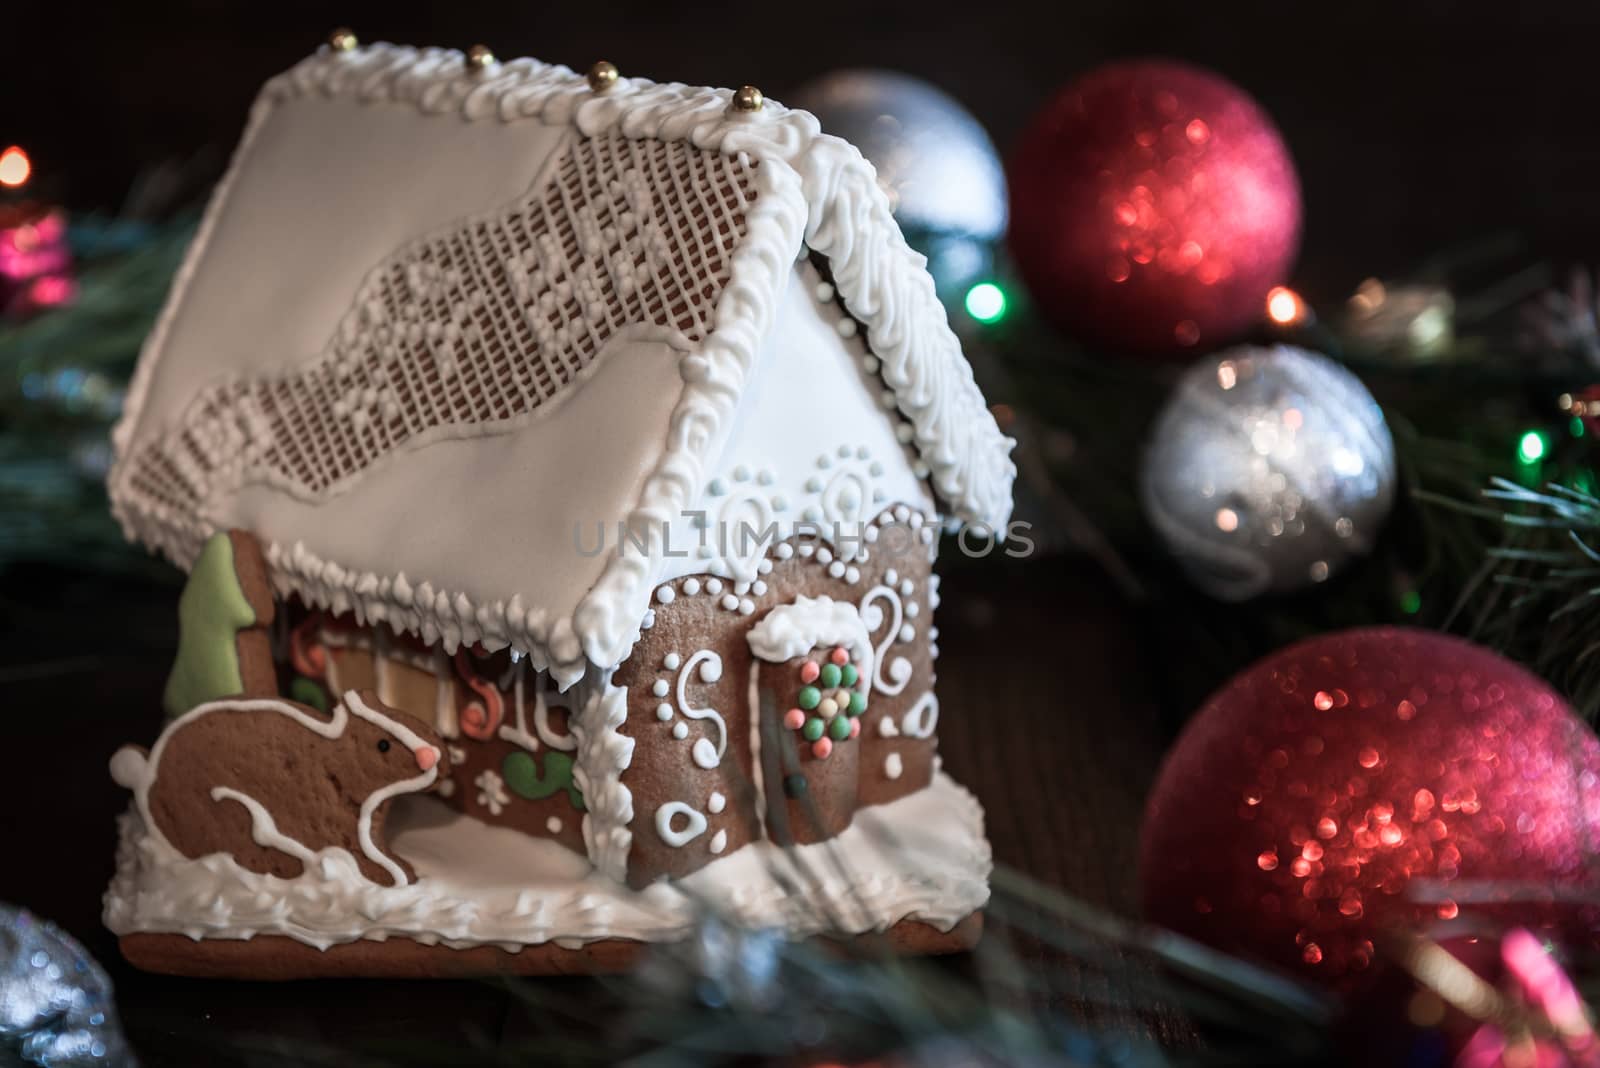 gingerbread house in the white glaze by Andreua